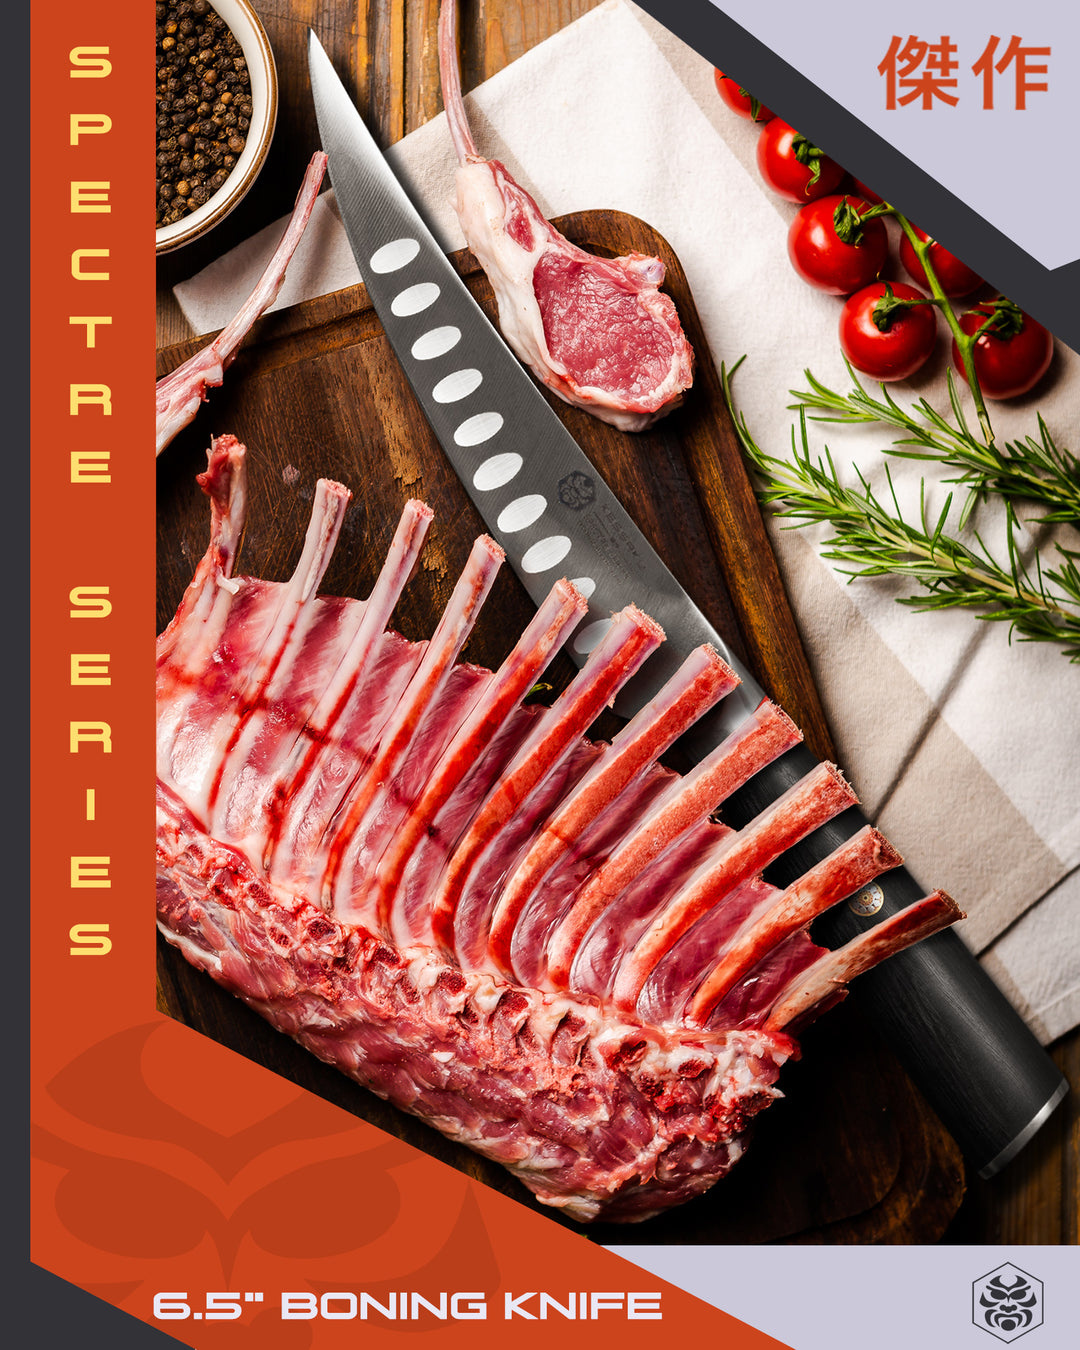 The Spectre Boning Knife used for frenching a rack of lamb